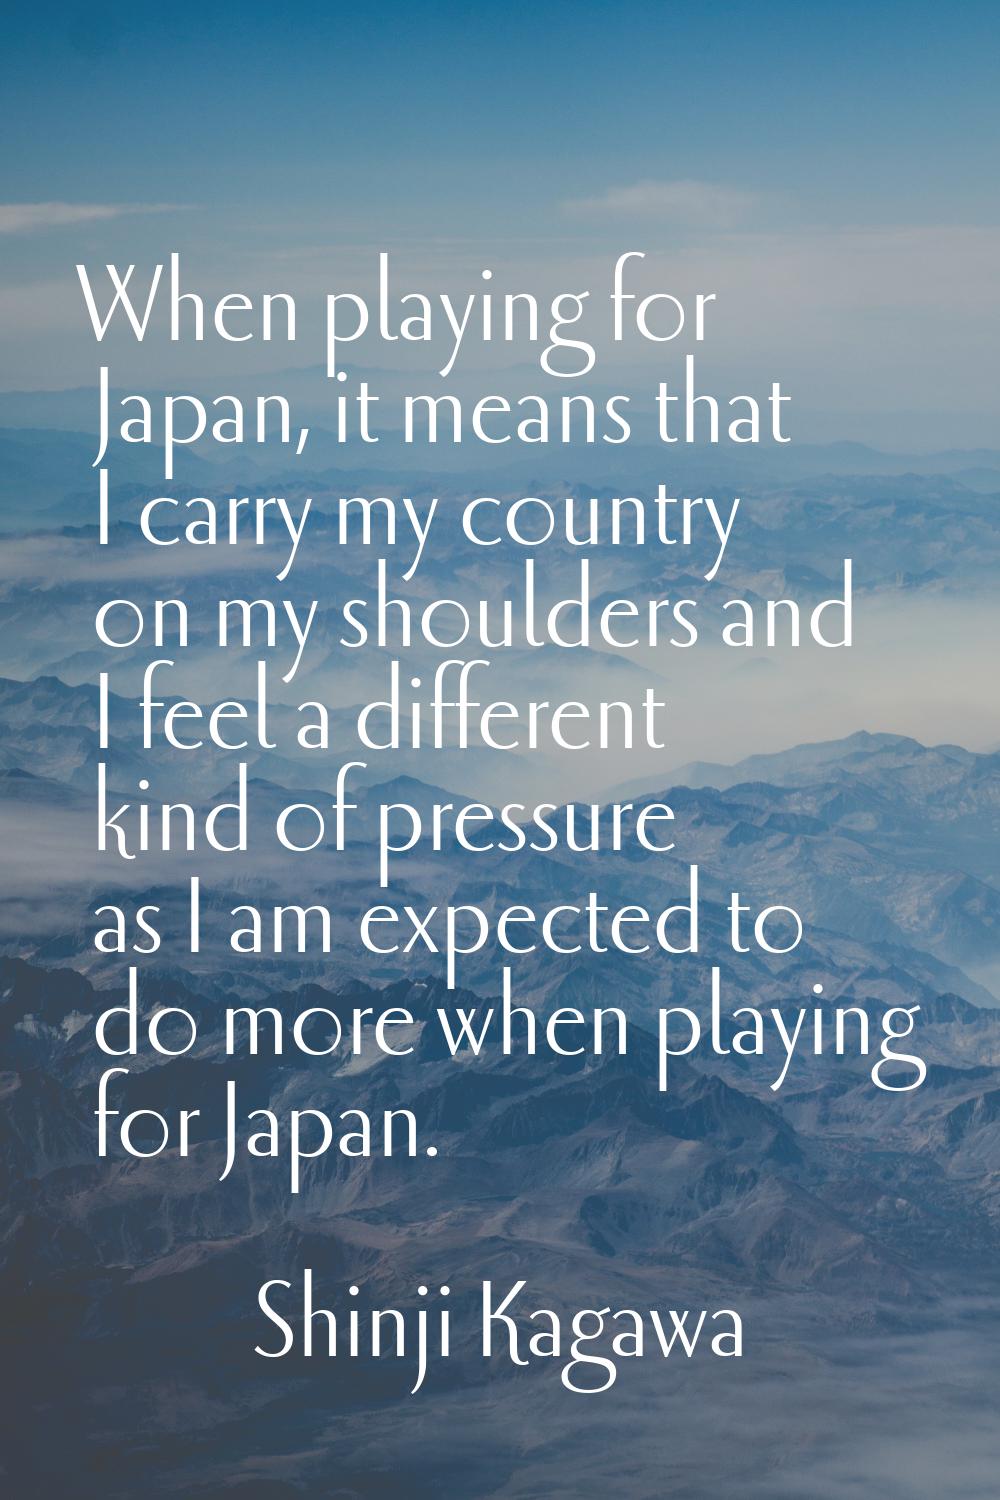 When playing for Japan, it means that I carry my country on my shoulders and I feel a different kin